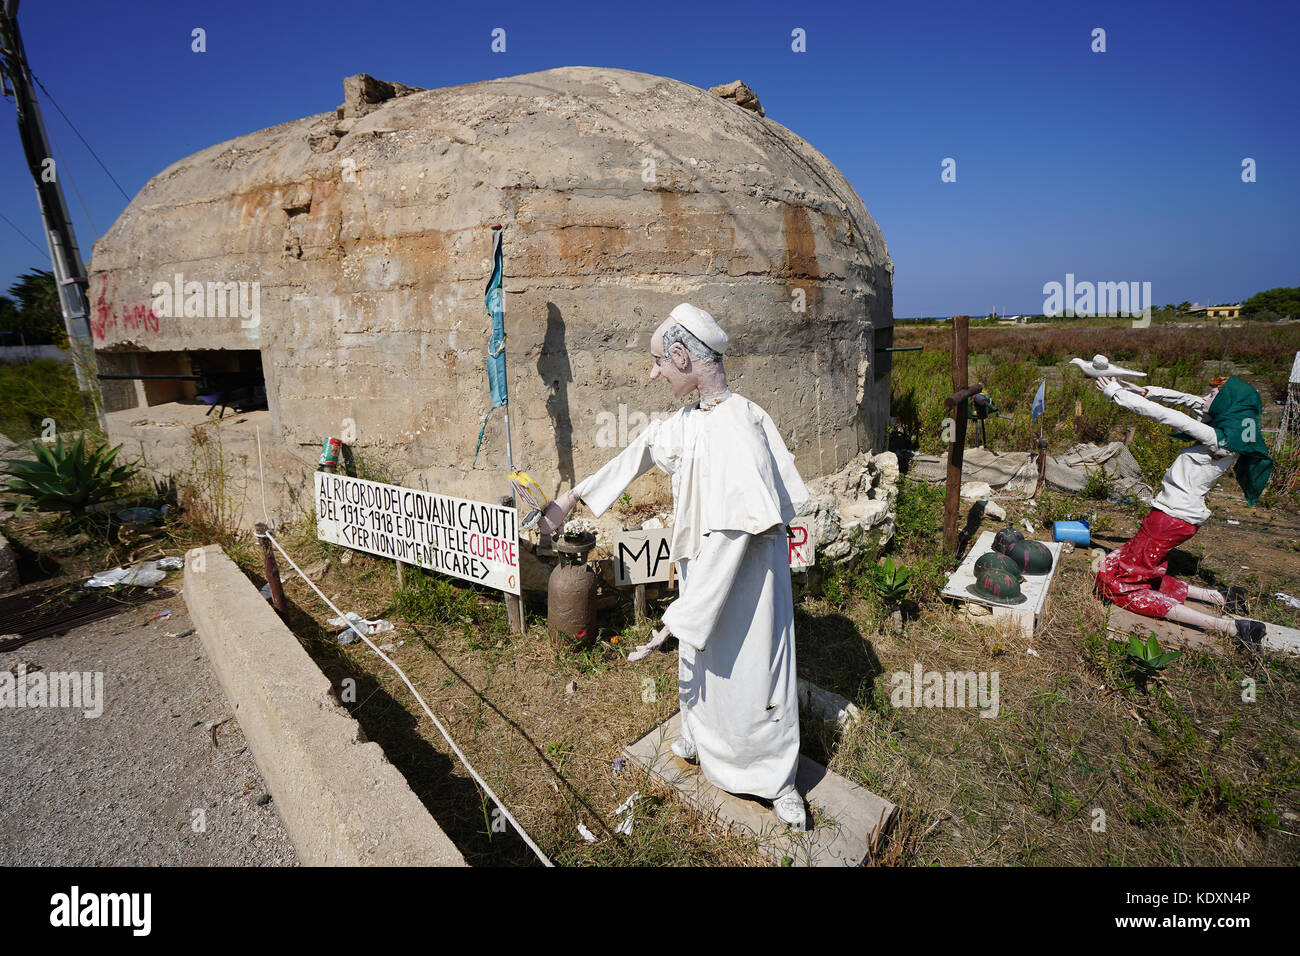 An old second world war two bunker near Trapani. From a series of travel  photos in Sicily, Italy. Photo date: Saturday, September 30, 2017. Photo  cred Stock Photo - Alamy